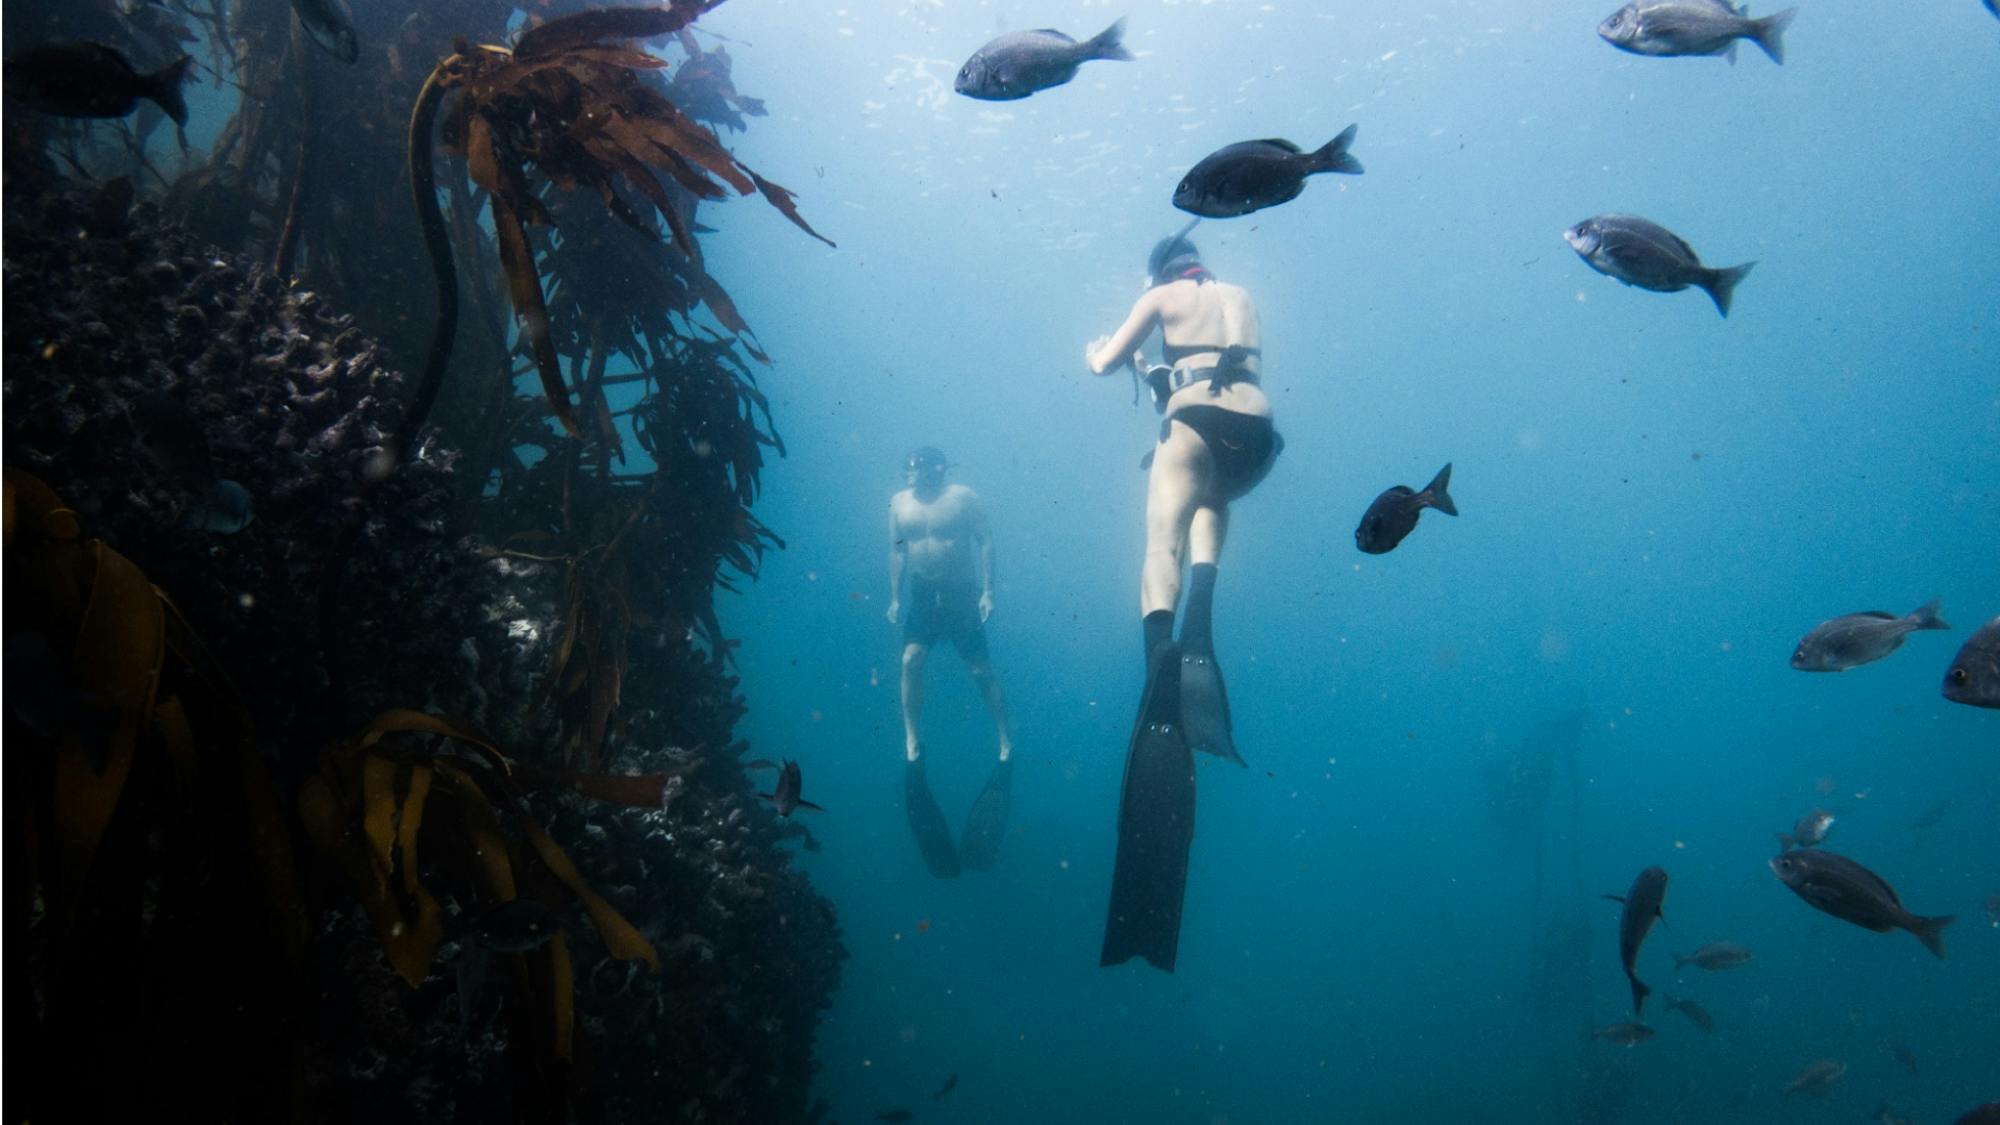 Pippa Ehrlich films Craig Foster underwater. They both wear flippers and bathing suits. To the left is a large protrusion of kelp. In the open water where they float, they are joined by a school of fish. A shaft of sunlight penetrates the surface of the ocean. 